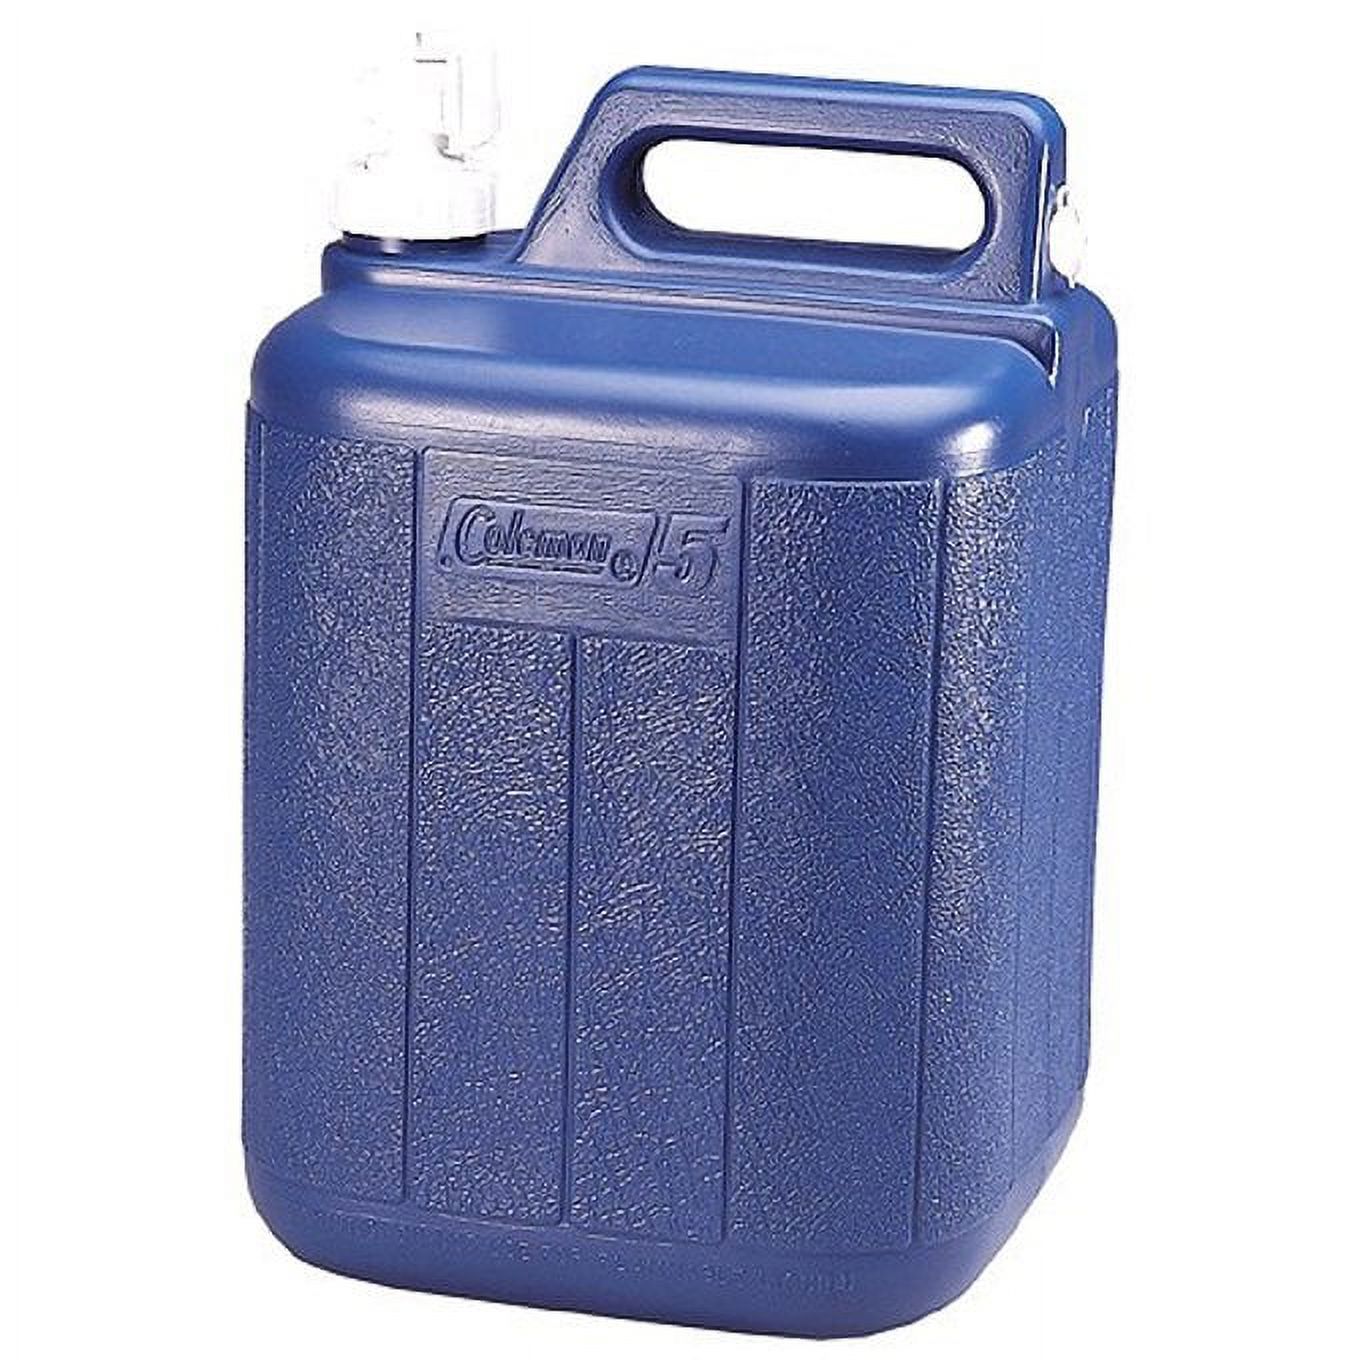 Coleman 5-Gallon Water Carrier, Blue - image 1 of 5